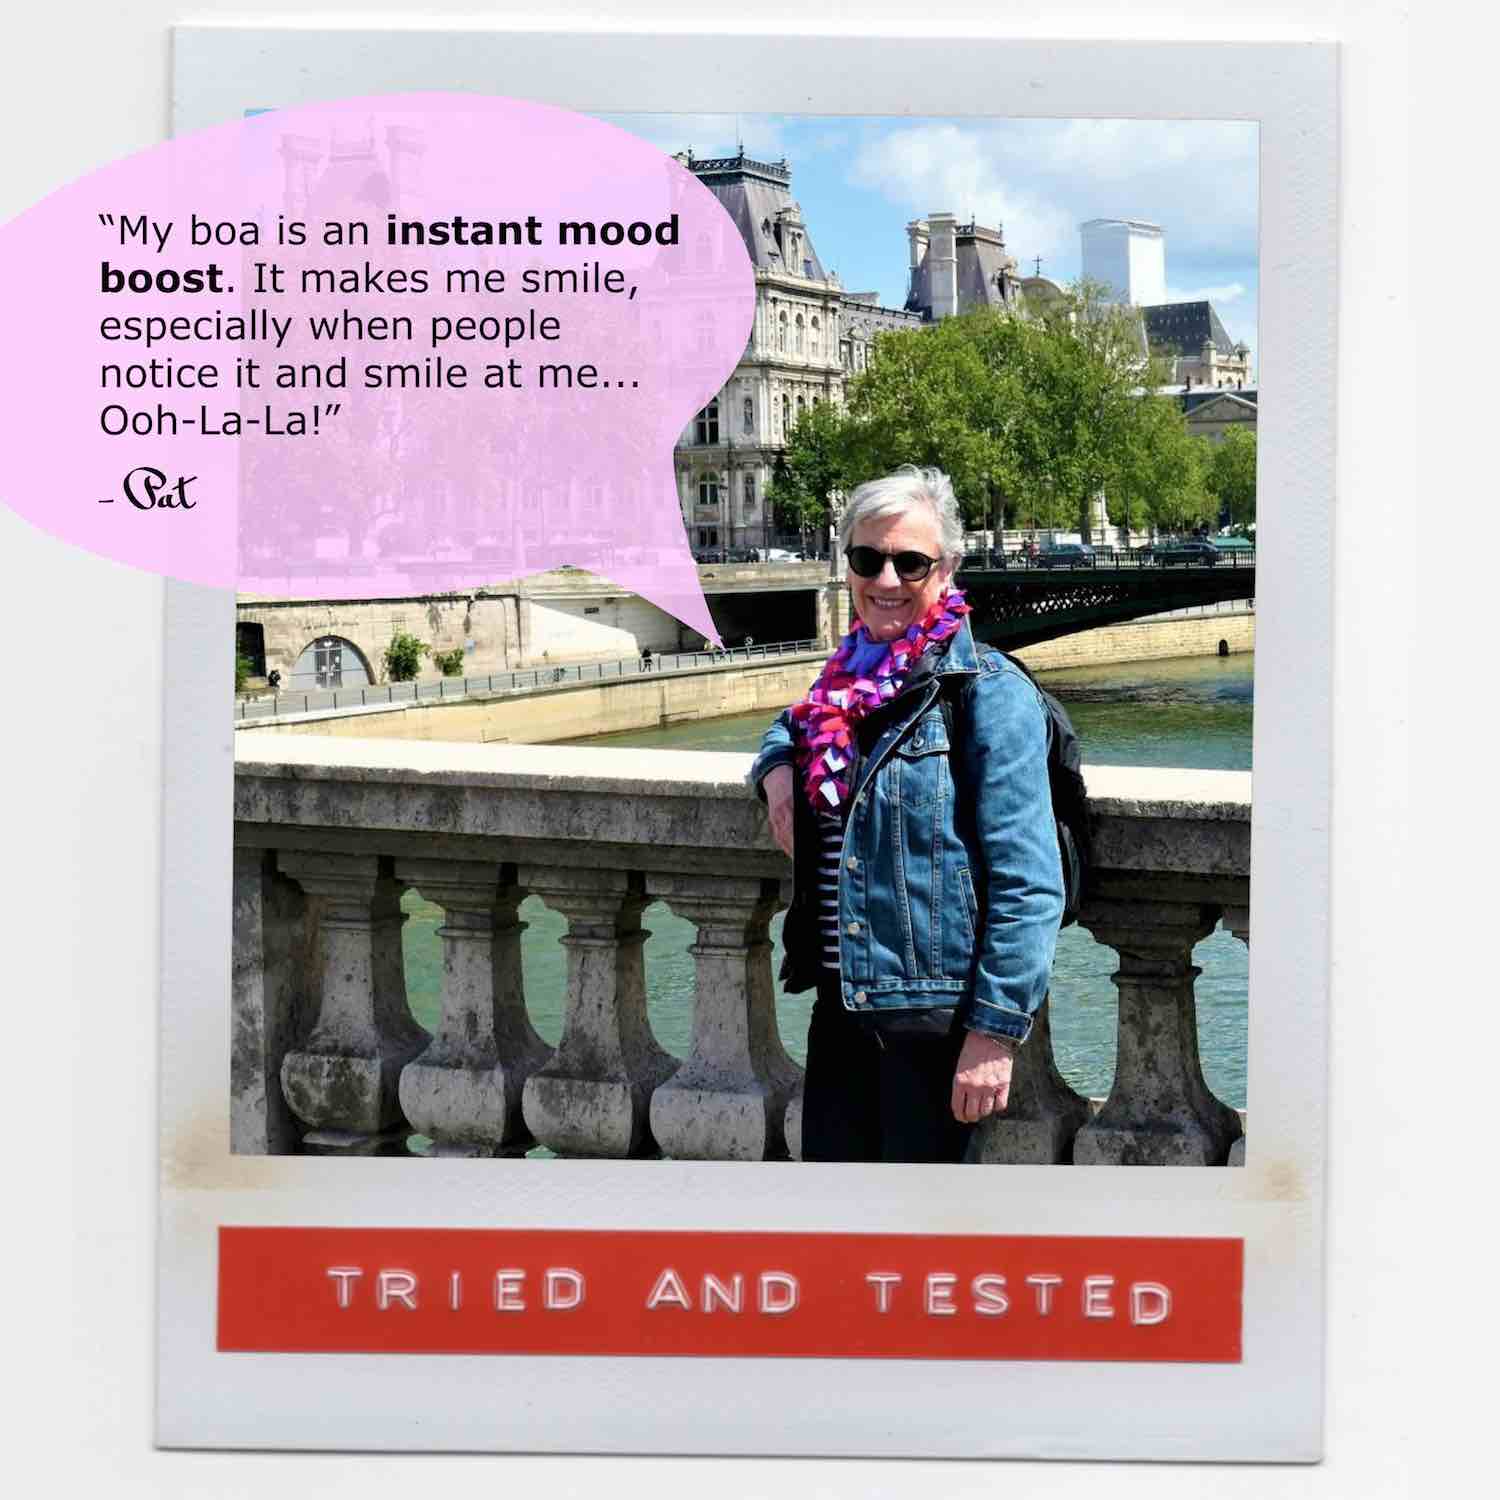 Pat feeling happy wearing her lush colorful fashion boa scarf with denim outfit while walking around Paris.